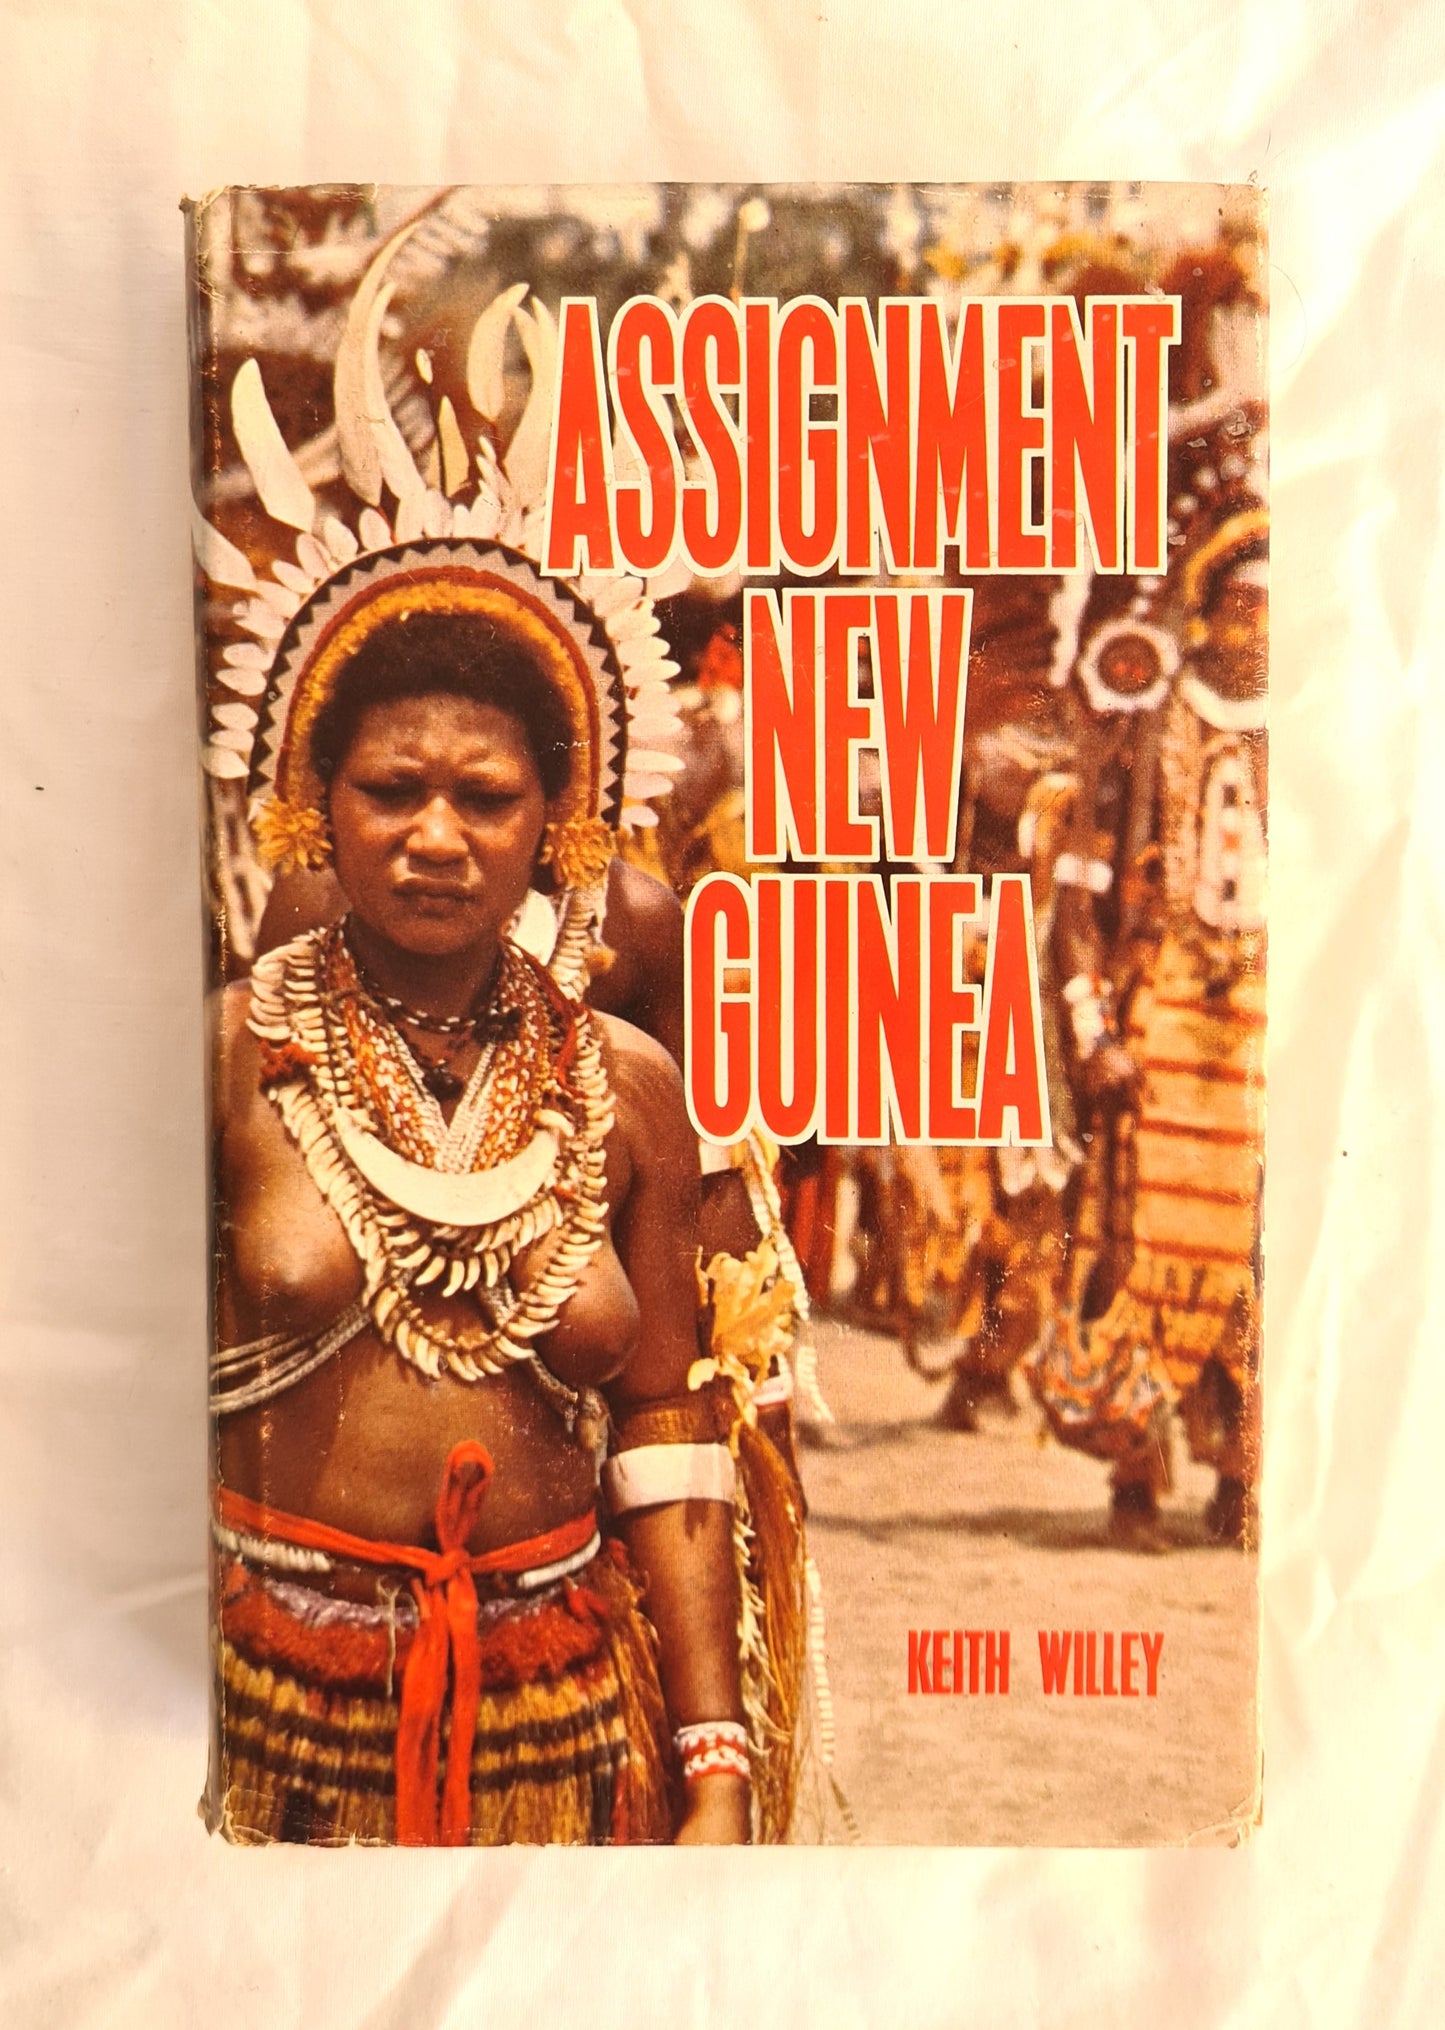 Assignment New Guinea by Keith Willey